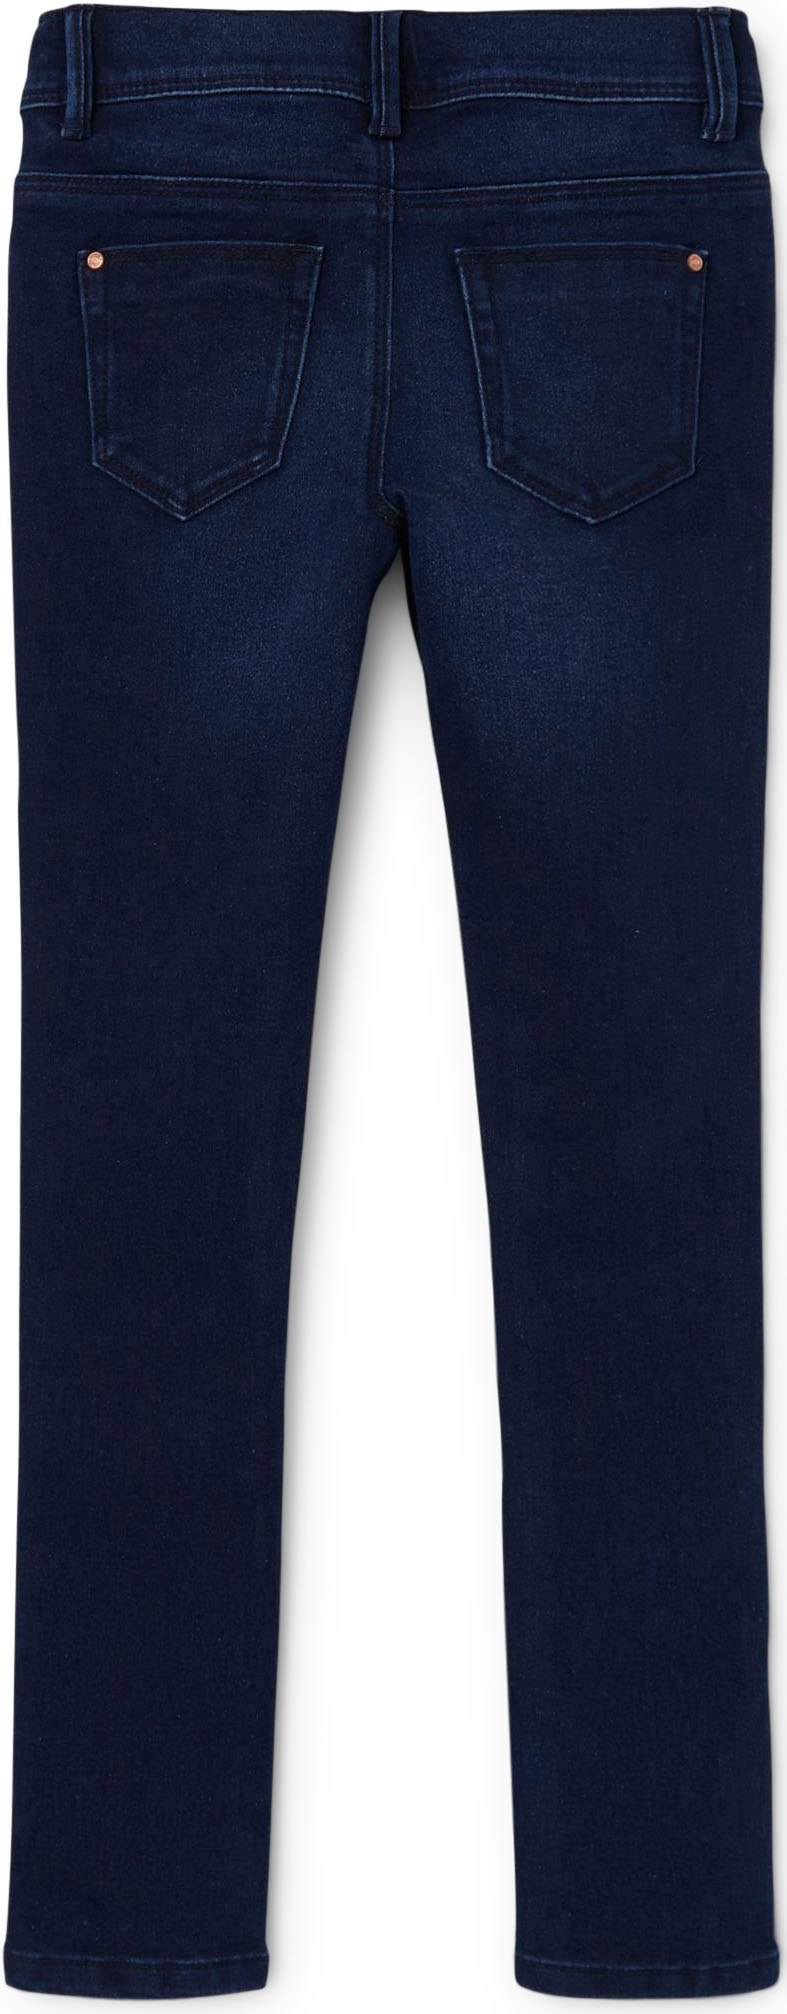 bestellen »NKFPOLLY Stretch-Jeans Name DNMTAX It PANT«